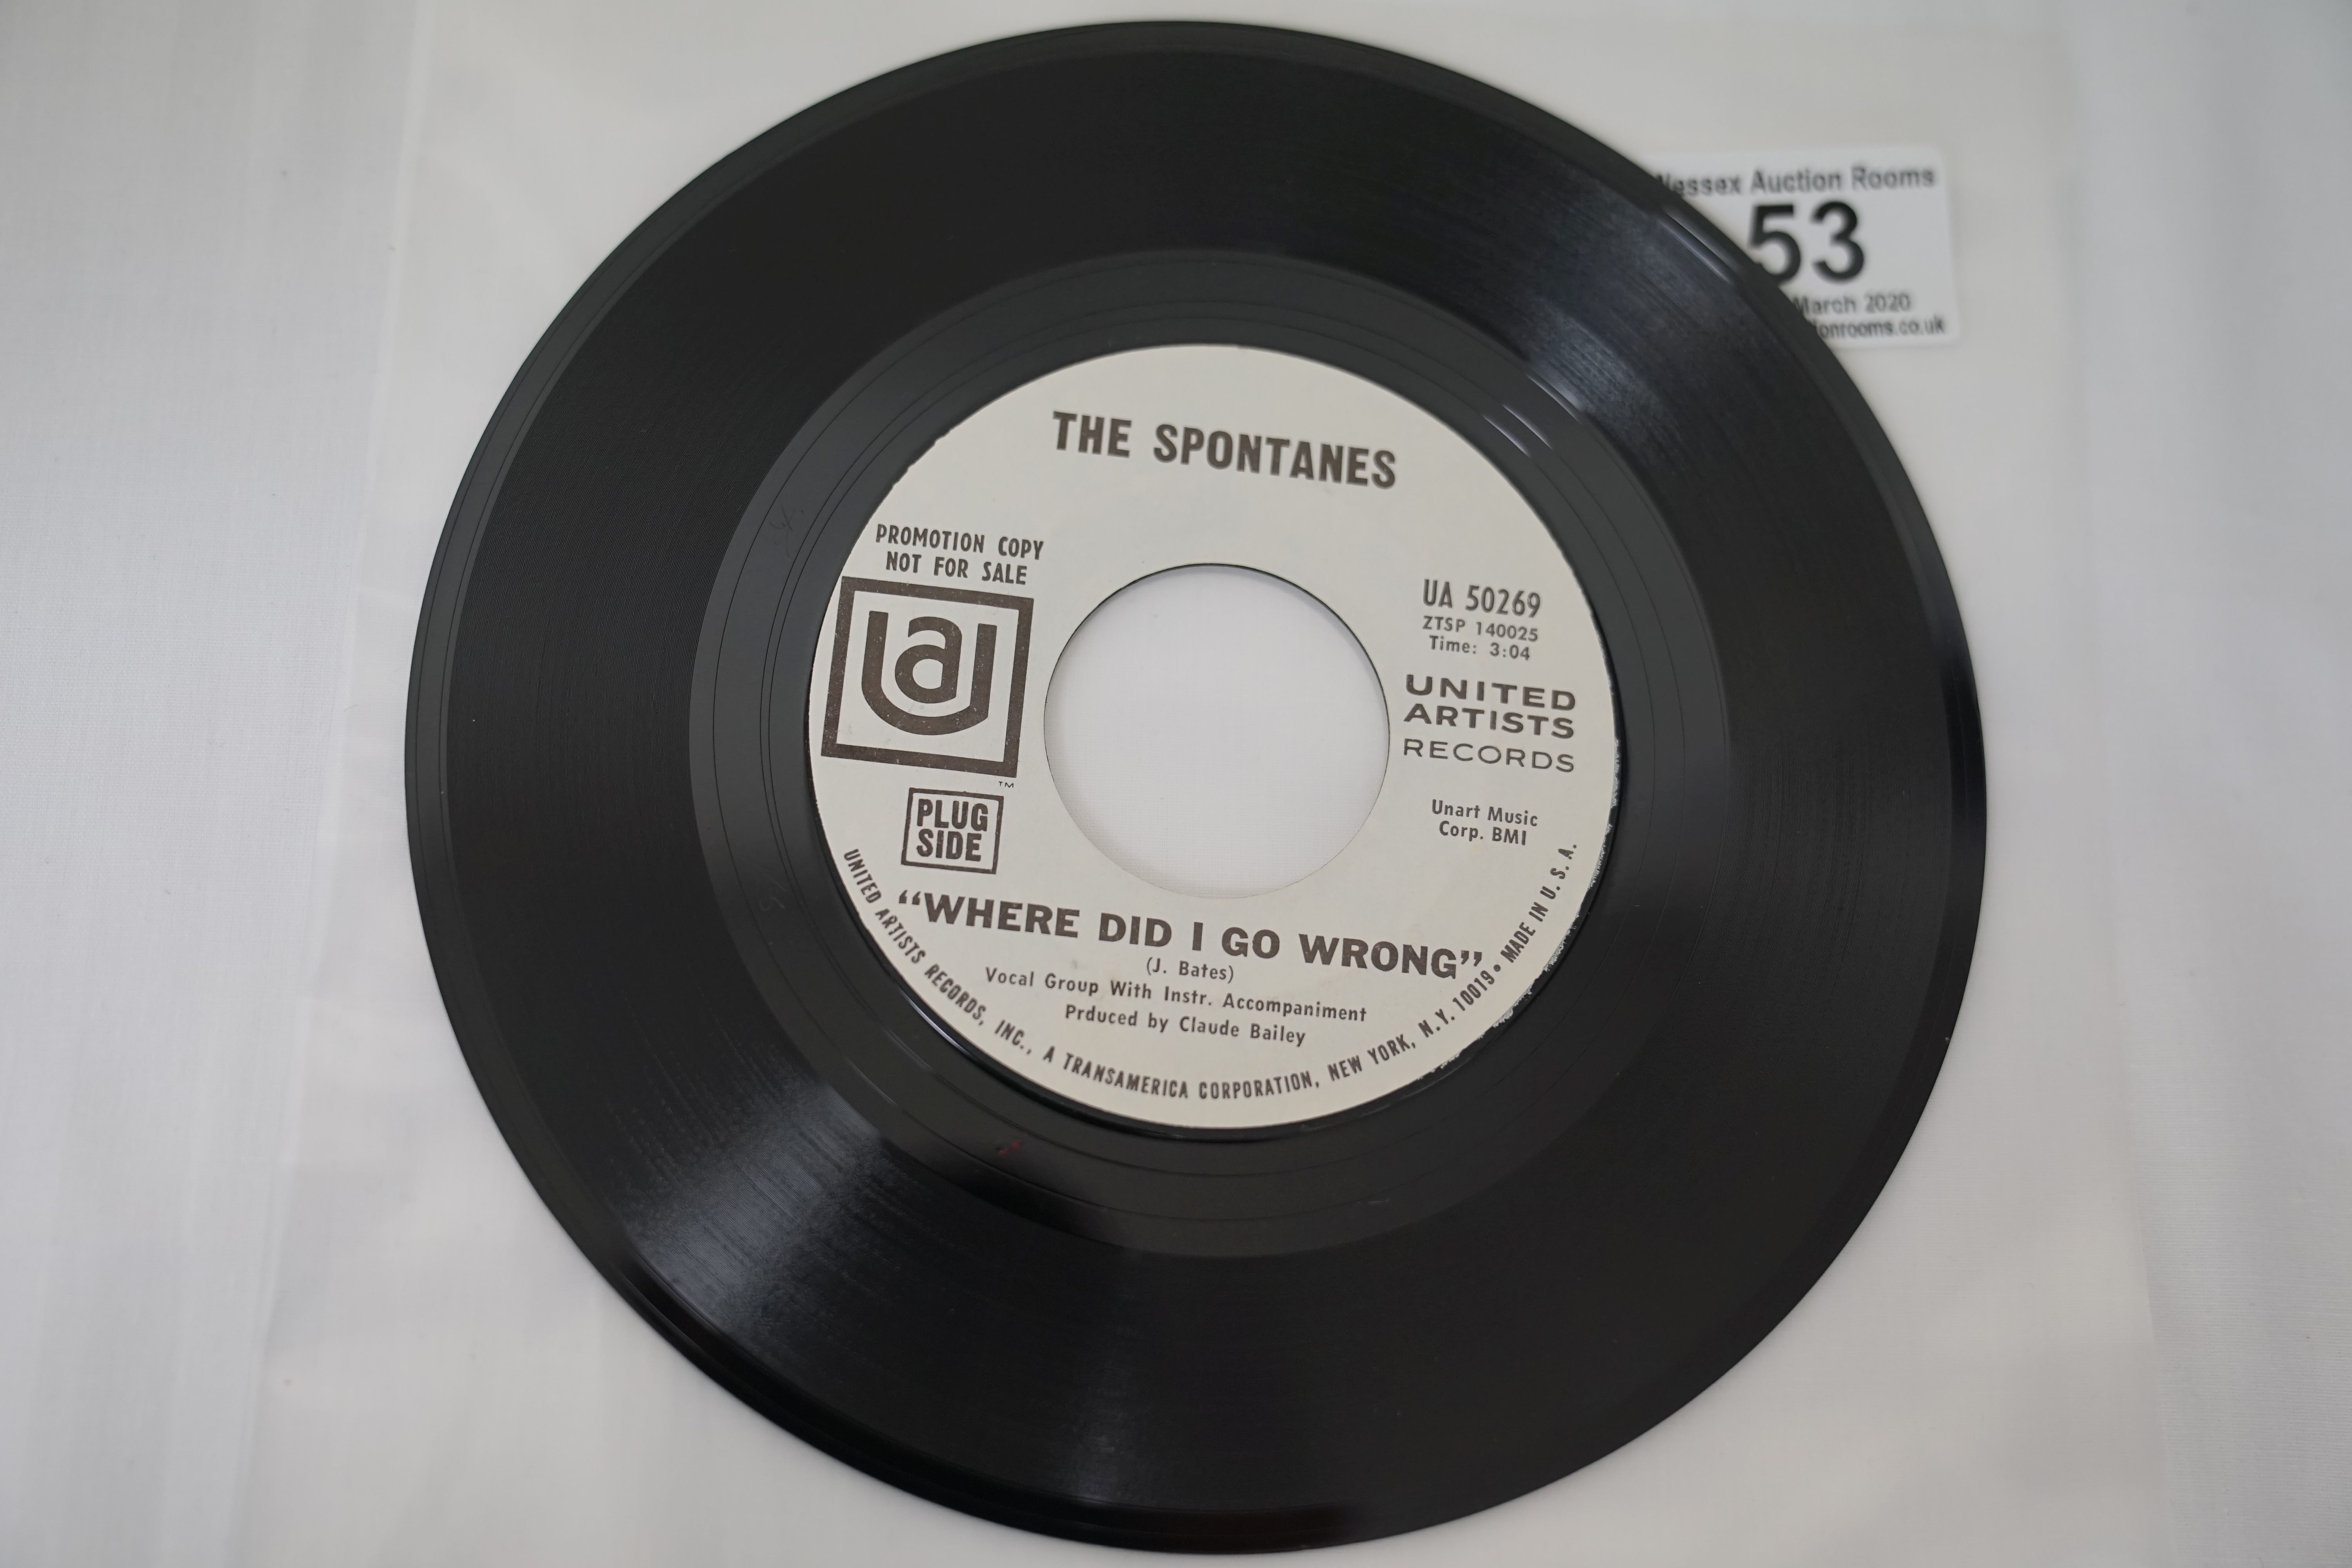 Vinyl - The Spontanes - Ain't No Bout Thing / Where Did I Go Wrong (United Artists Records UA - Image 4 of 5